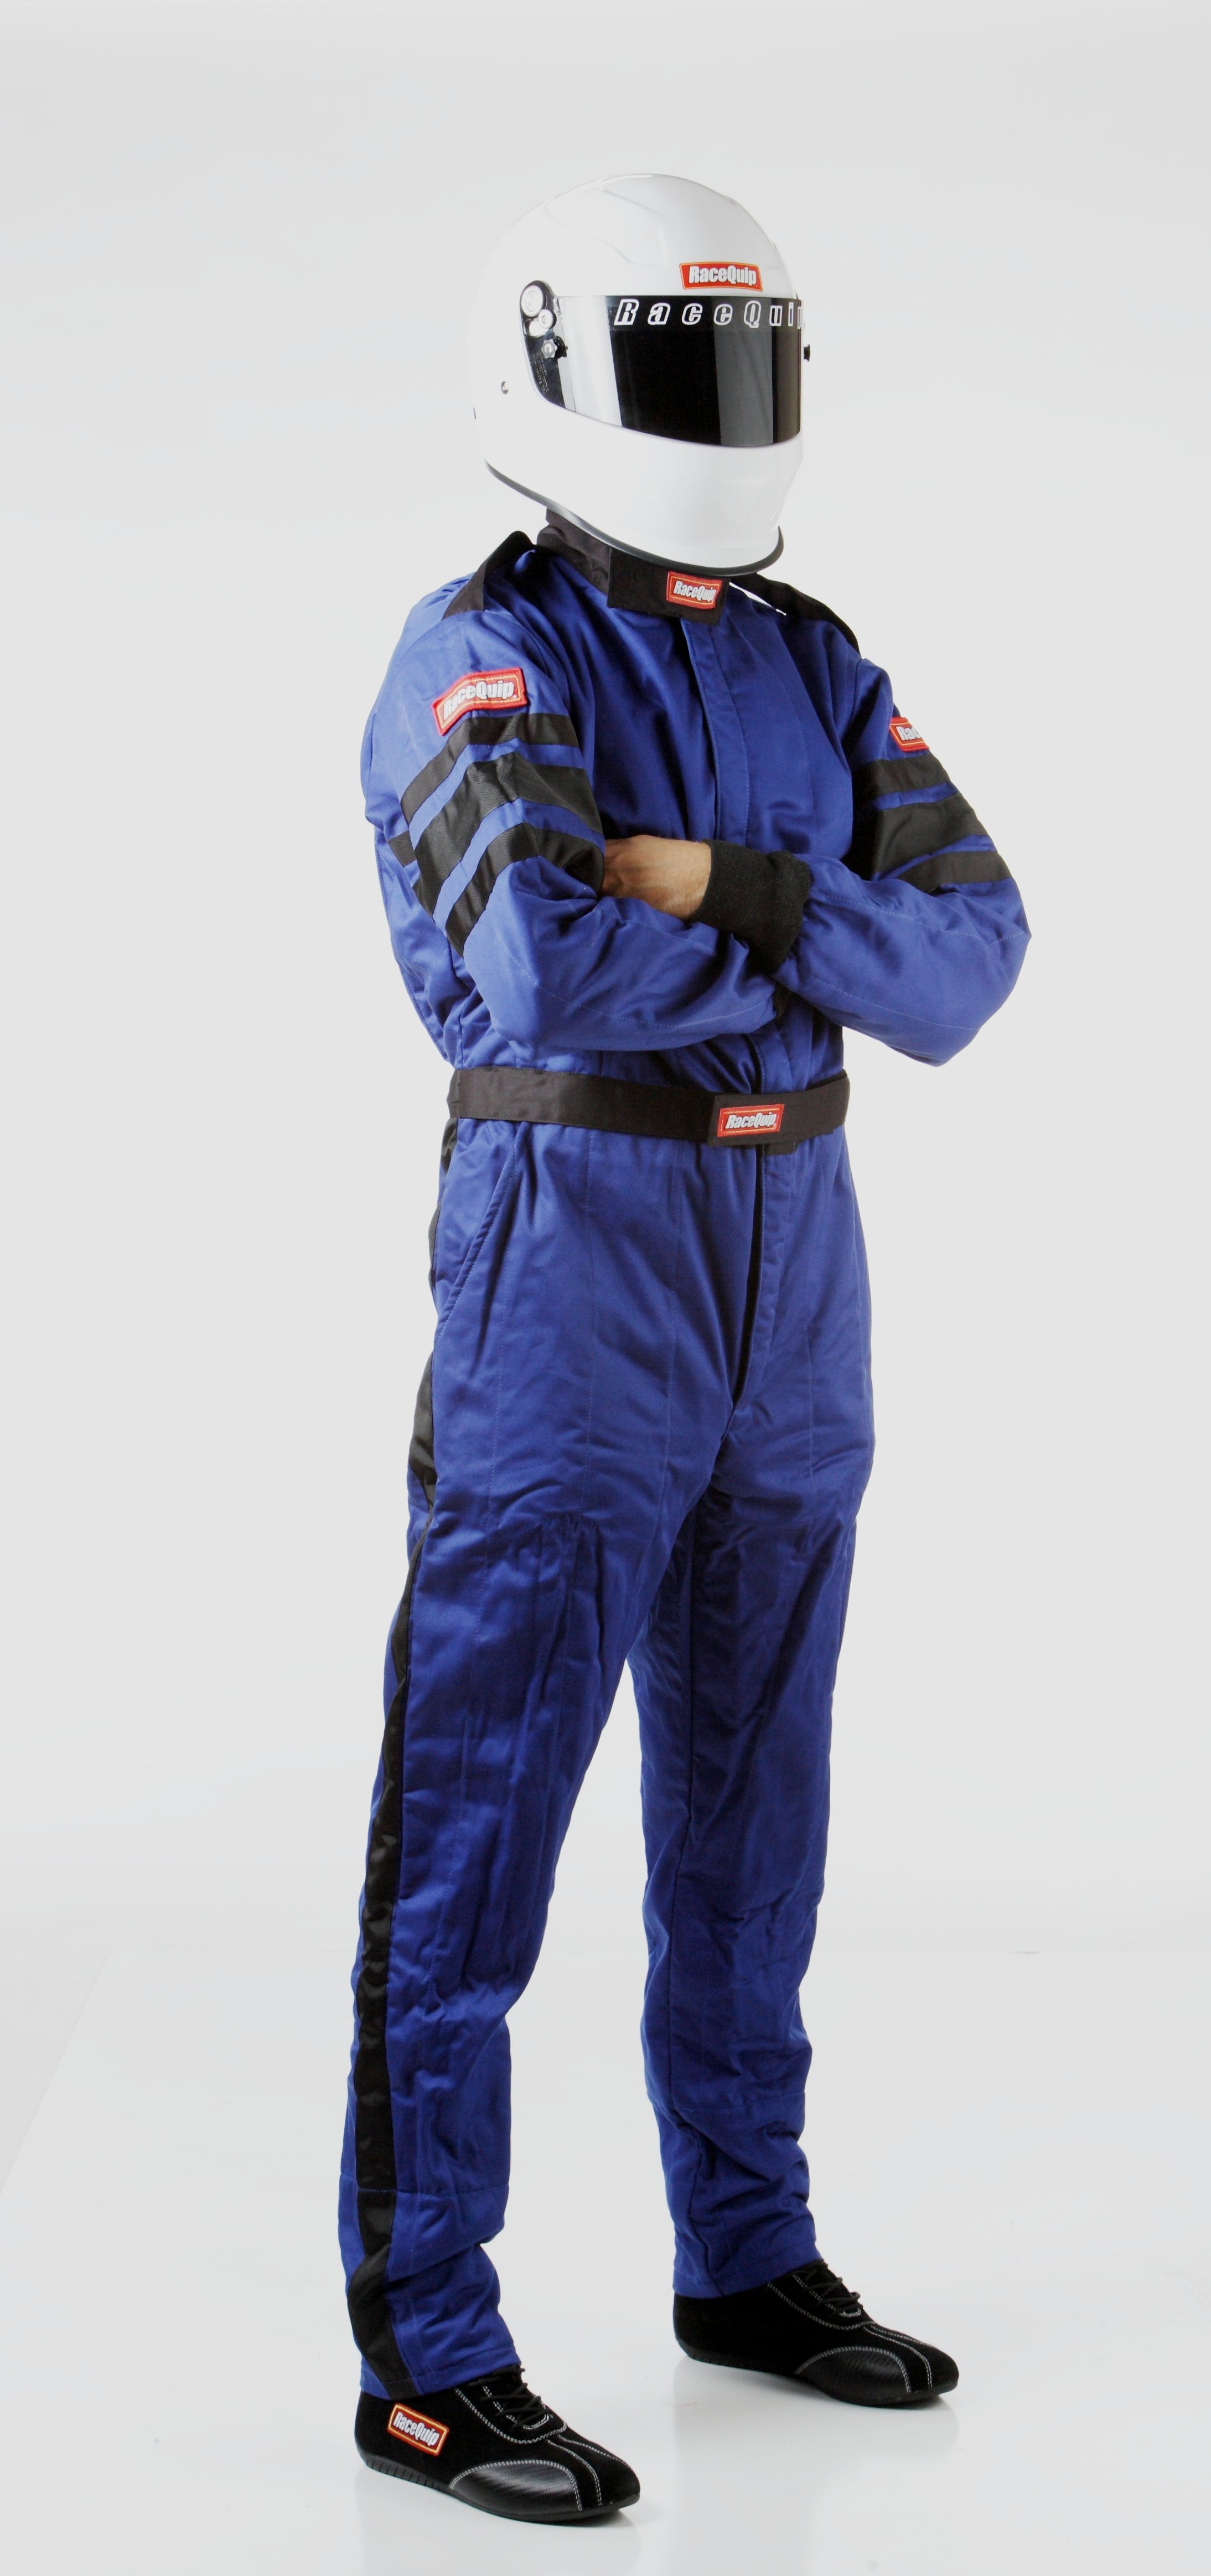 RaceQuip 120025 SFI-5 Pyrovatex One-Piece Multi-Layer Racing Fire Suit (Blue, Large)